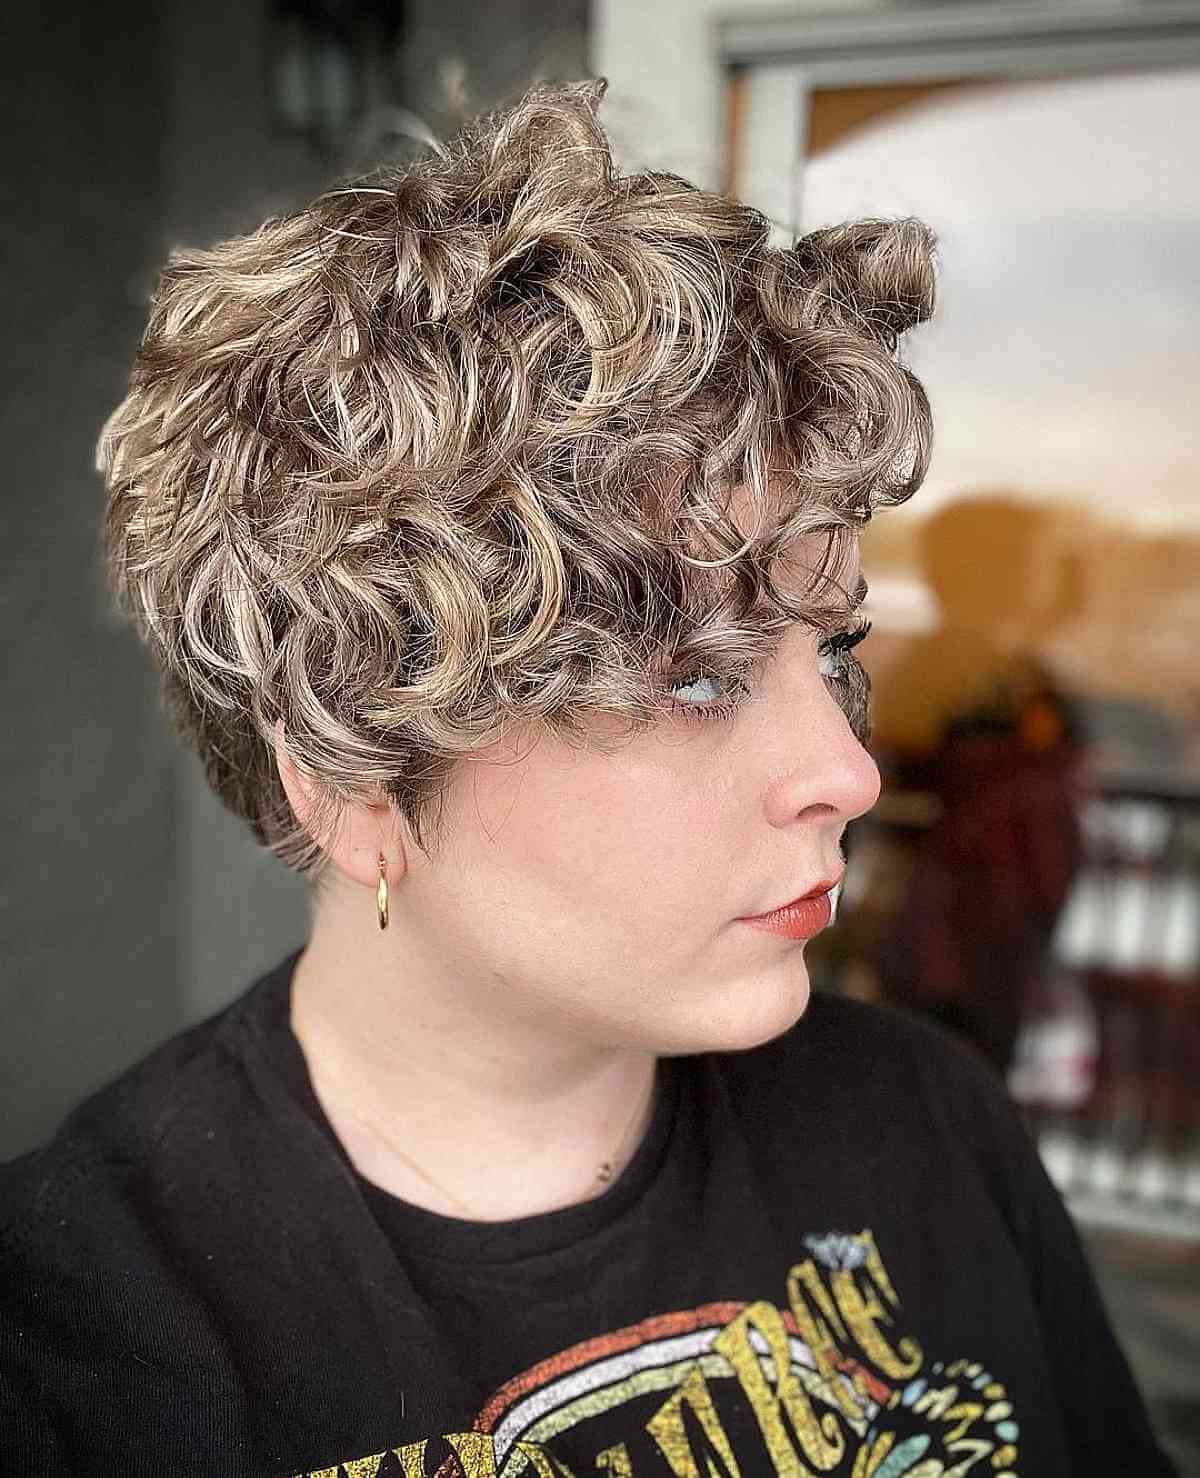 Short Curly and Wavy Pixie Cut for Round Face Shapes with Thicker Hair